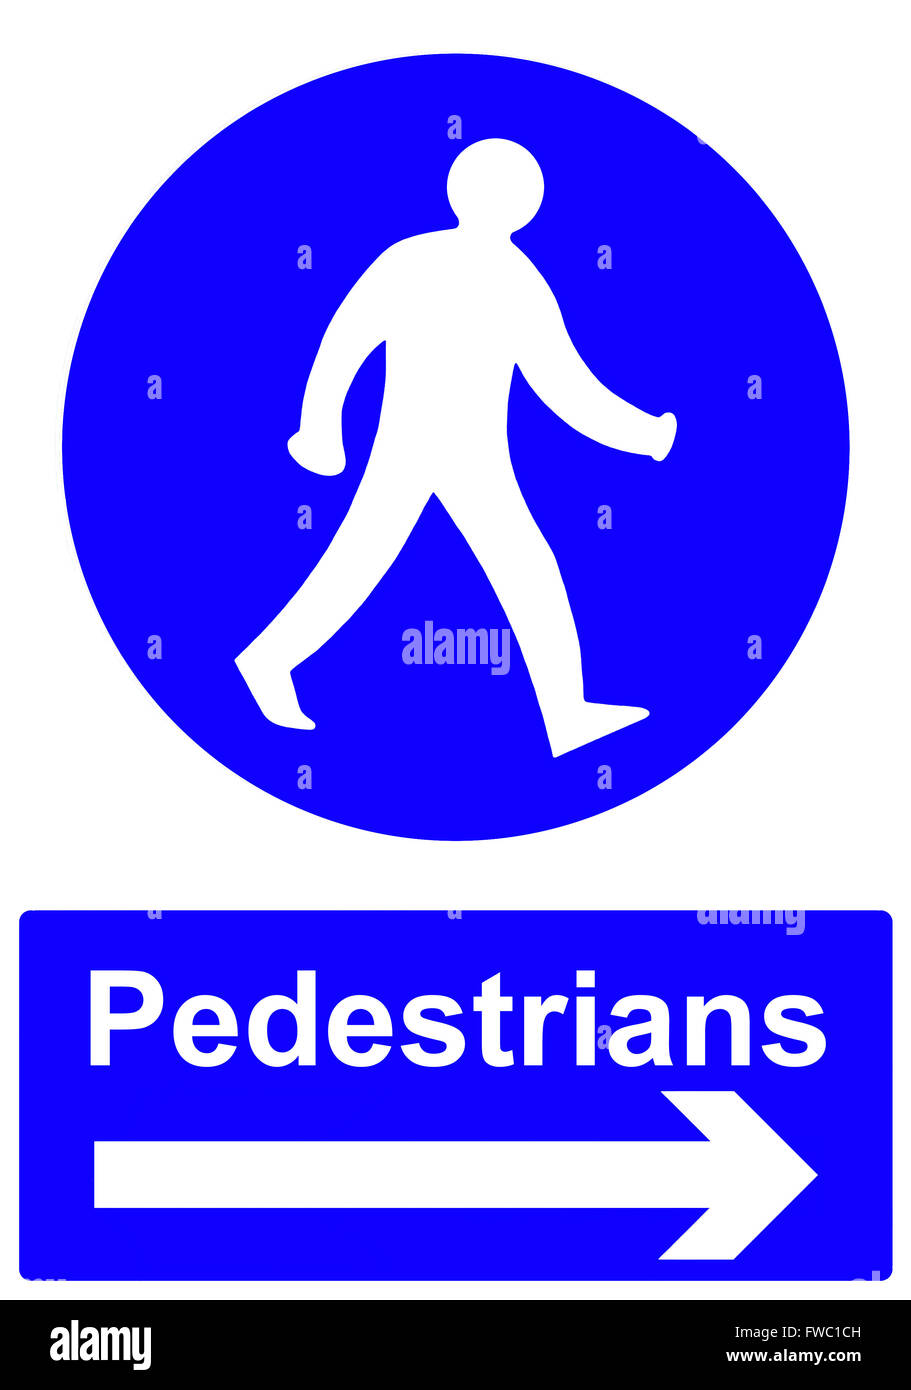 Pedestrians stay to the right at this point sign Stock Photo